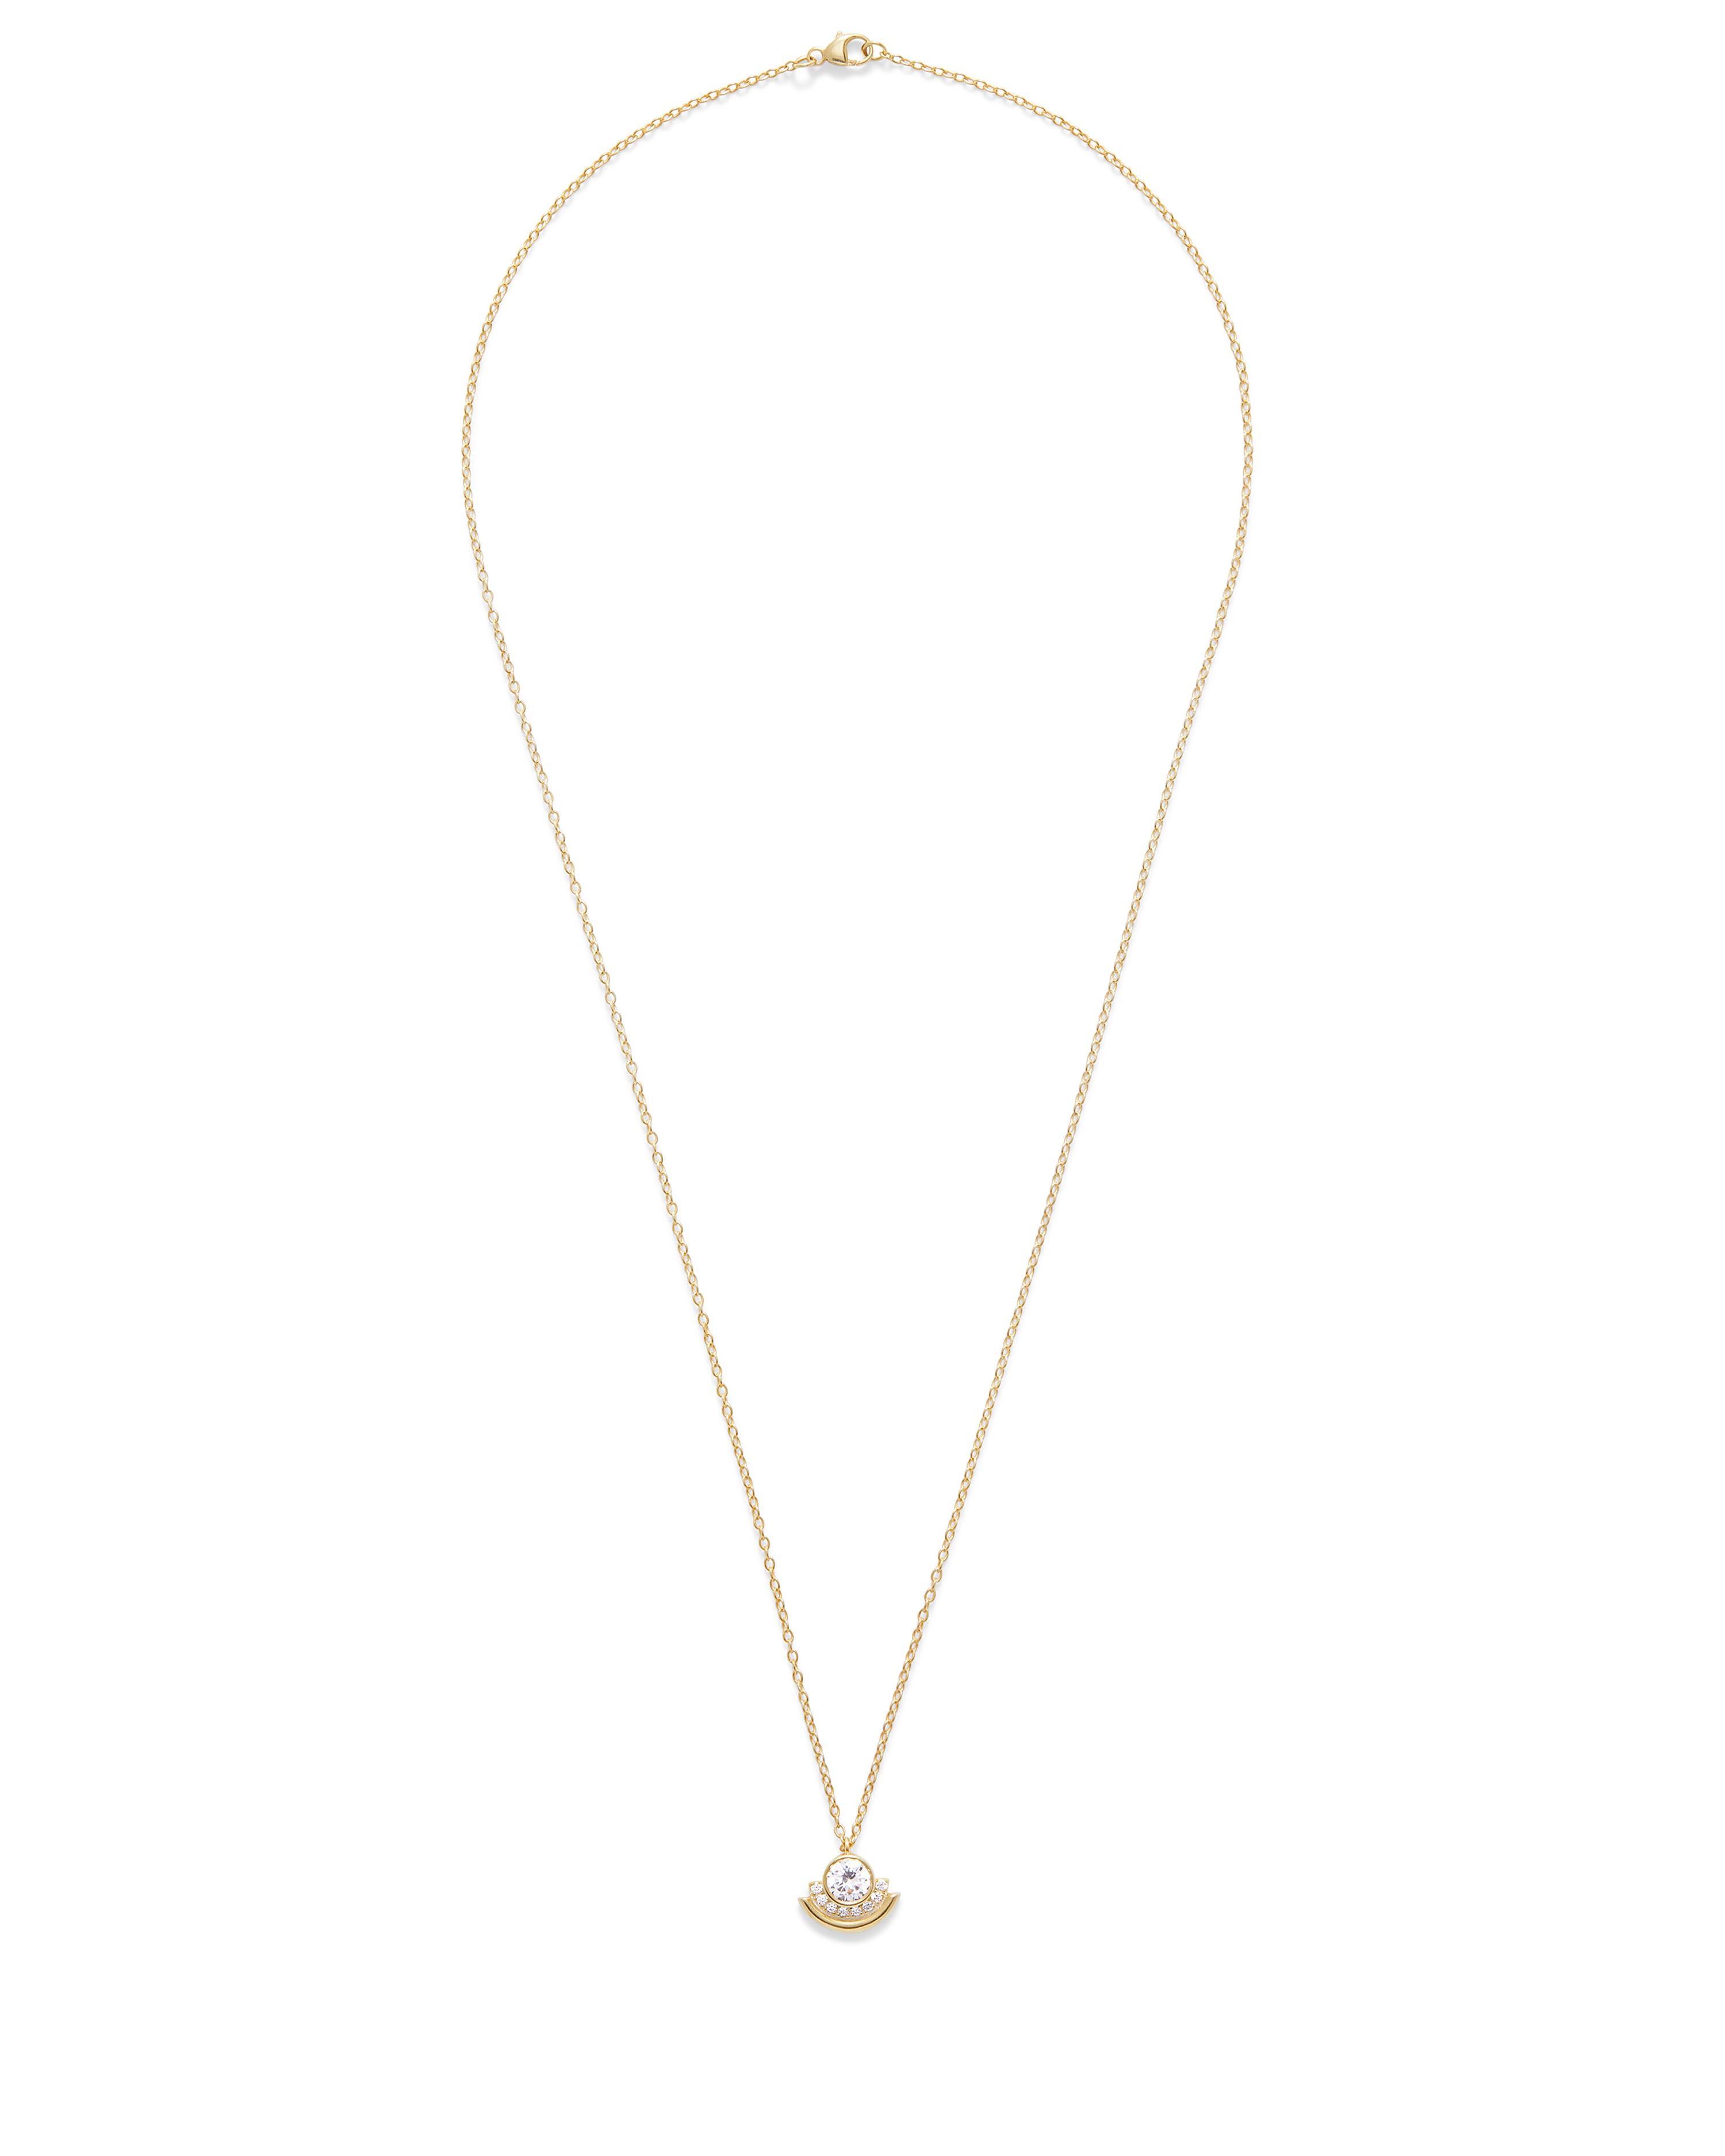 This architectural yet minimal arc shaped 14K gold charm is ready to slip onto your favorite chain. It features a large bezel set diamond surrounded with modern banded detail. Its petite size makes it suitable for everyday wear or layering with your